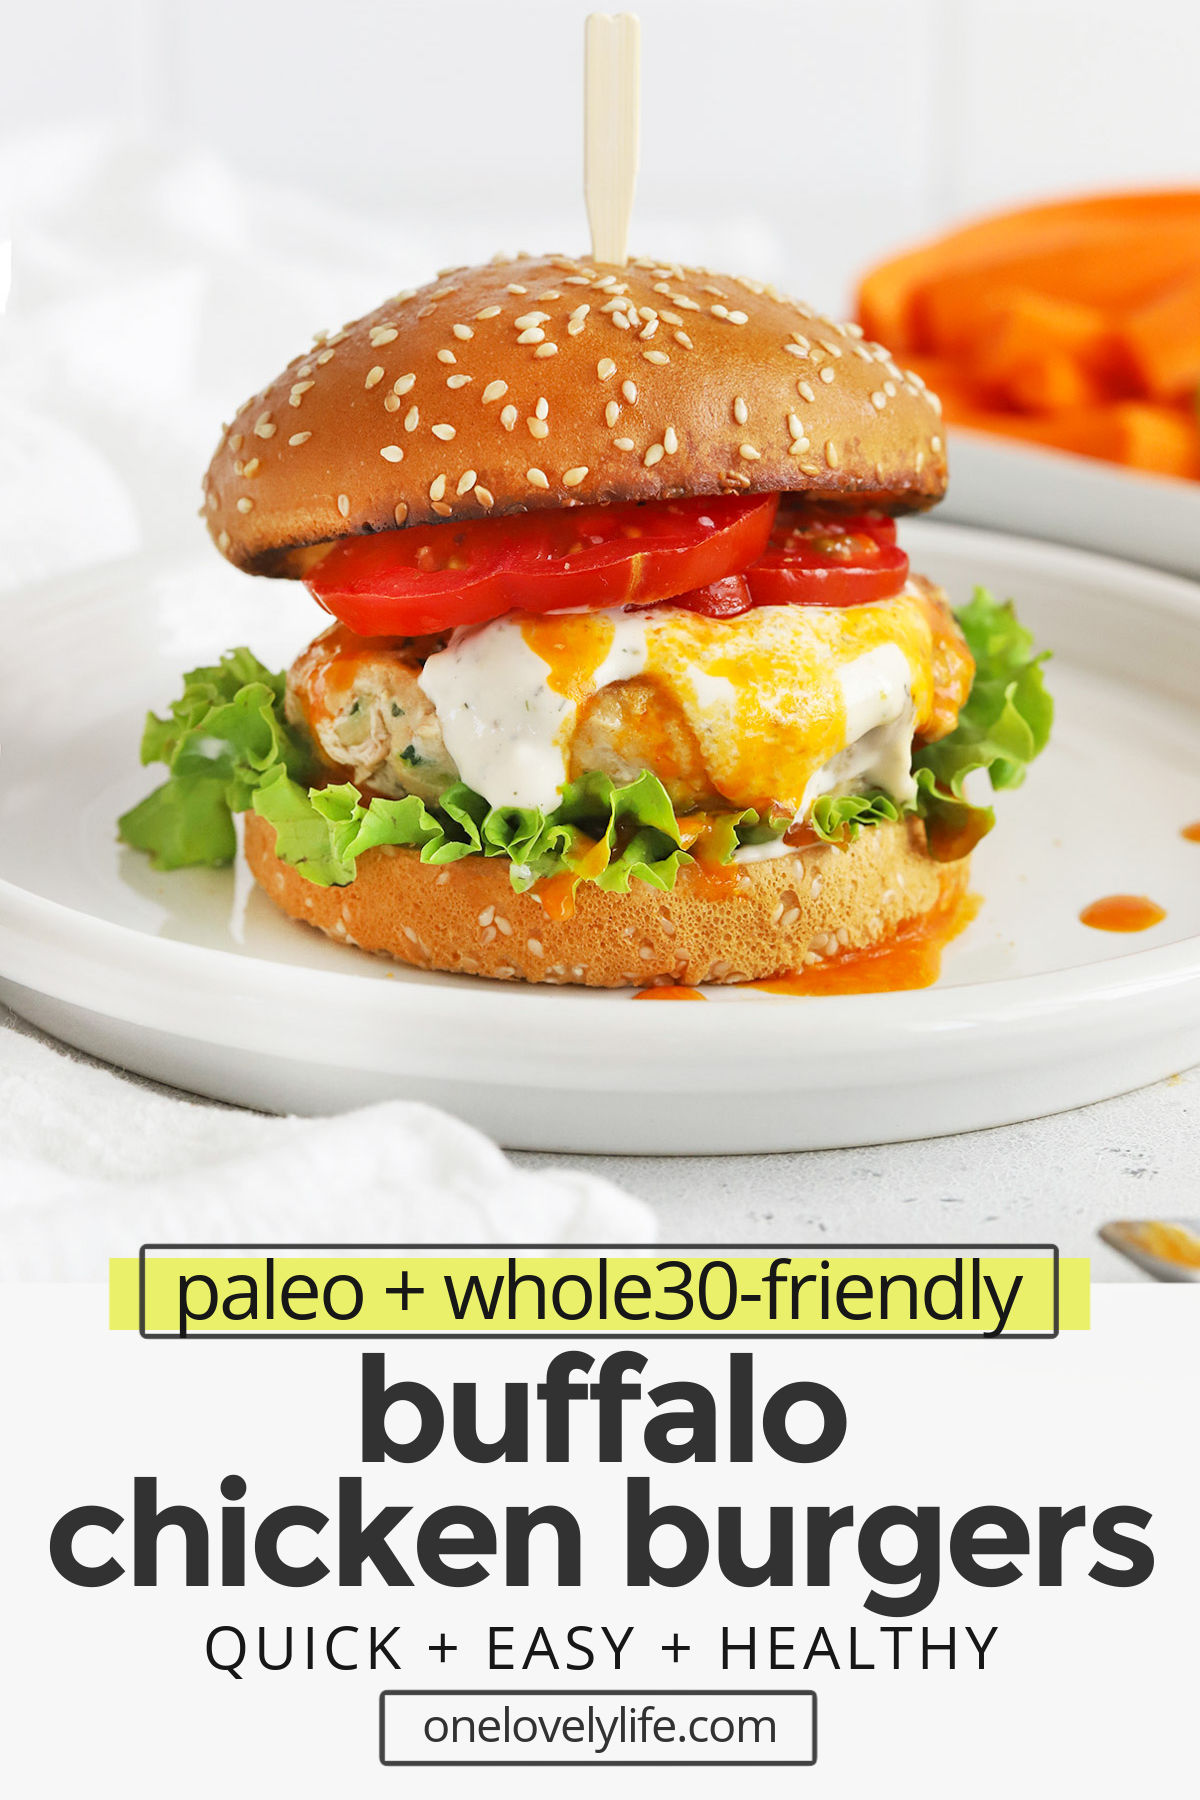 Healthy Buffalo Chicken Burgers - Lean chicken burgers with grated zucchini and a buffalo kick make a fresh, easy dinner any time! (Paleo & Whole30-Friendly) // paleo buffalo chicken burgers // whole30 buffalo chicken burgers // chicken burger recipe // healthy grilling recipe #glutenfree #burger #chicken #whole30 #paleo